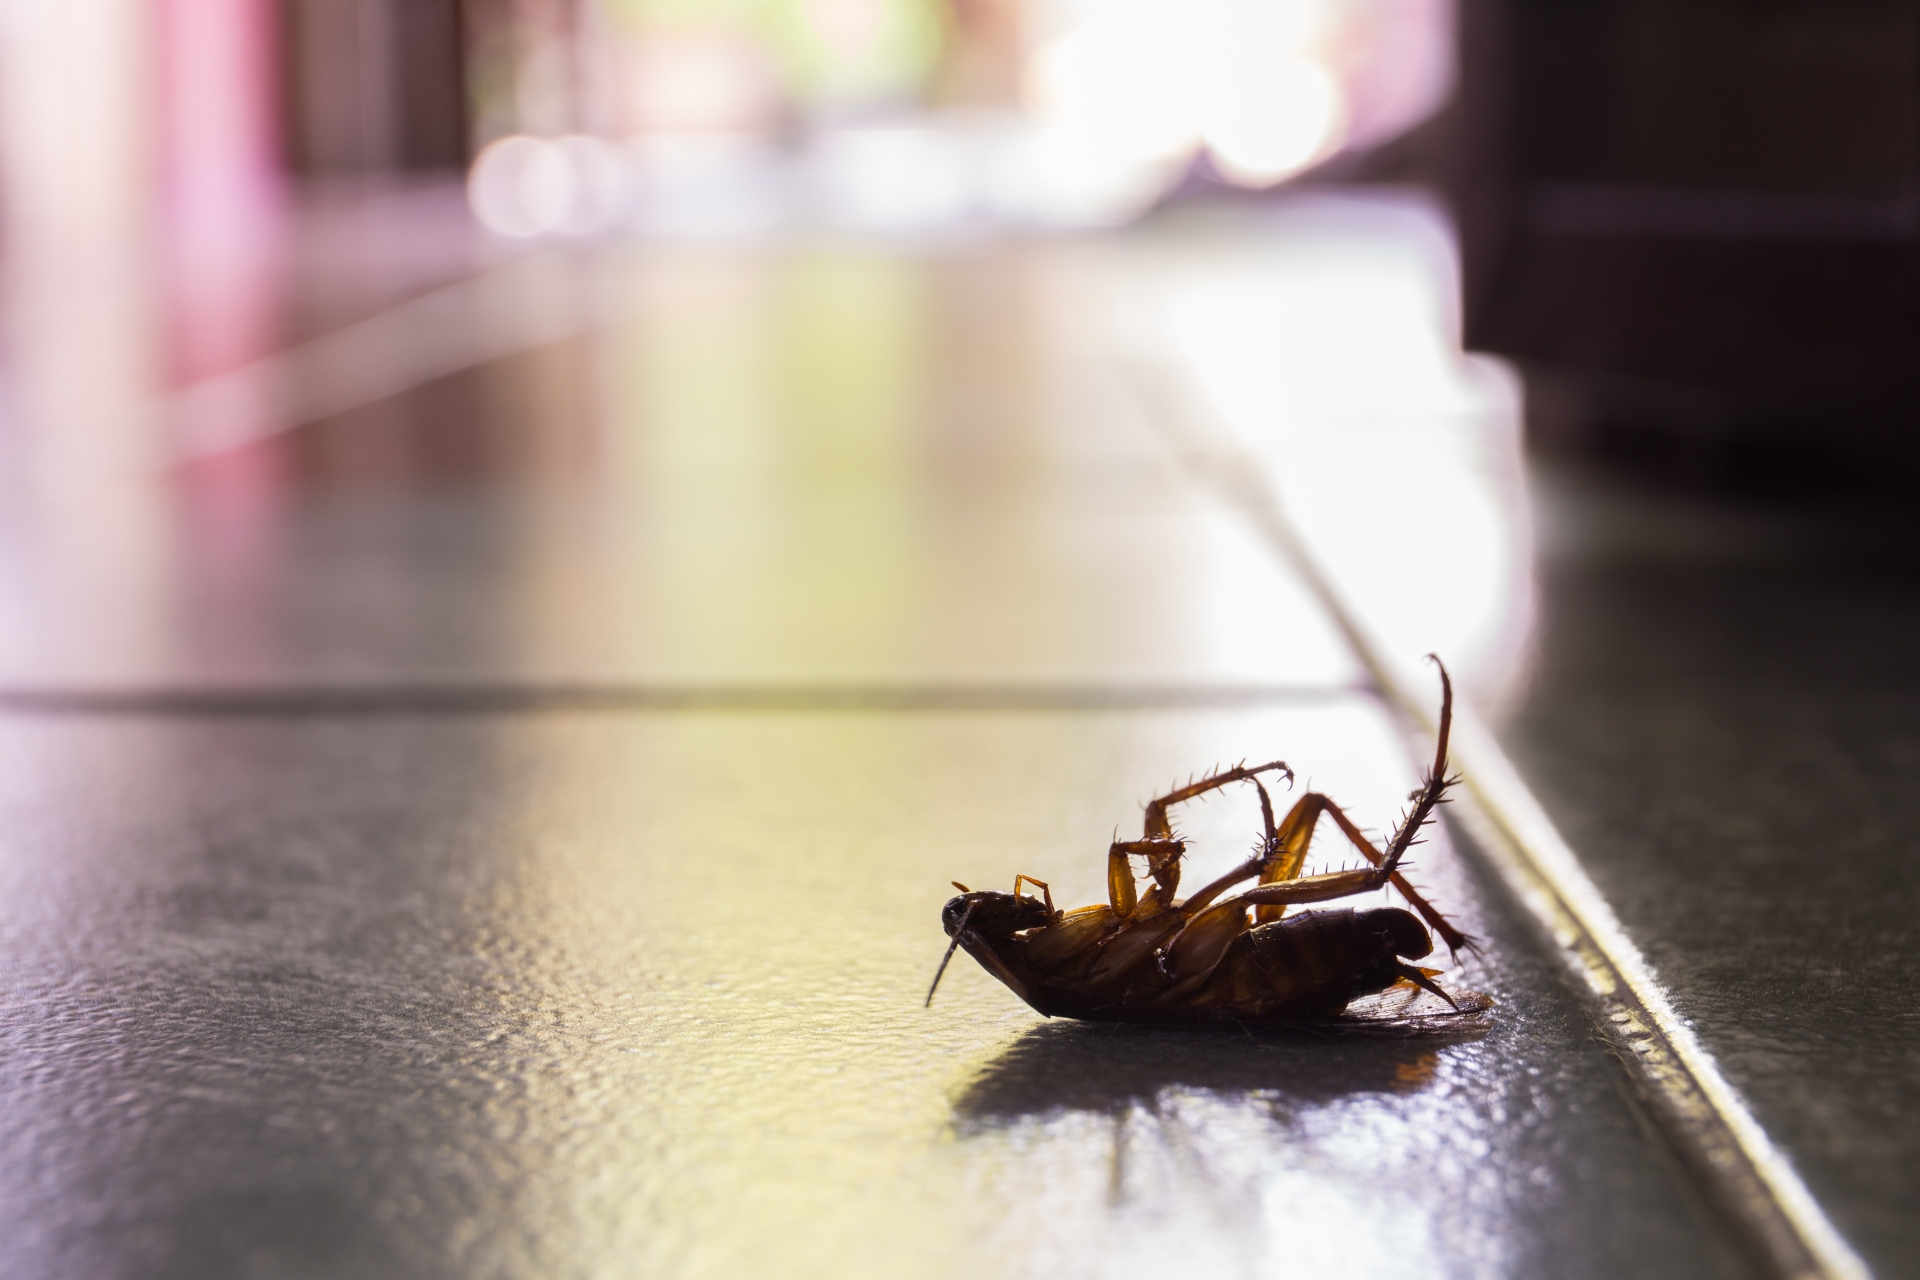 Cockroach Control, Pest Control in Addlestone, New Haw, Woodham, KT15. Call Now 020 8166 9746